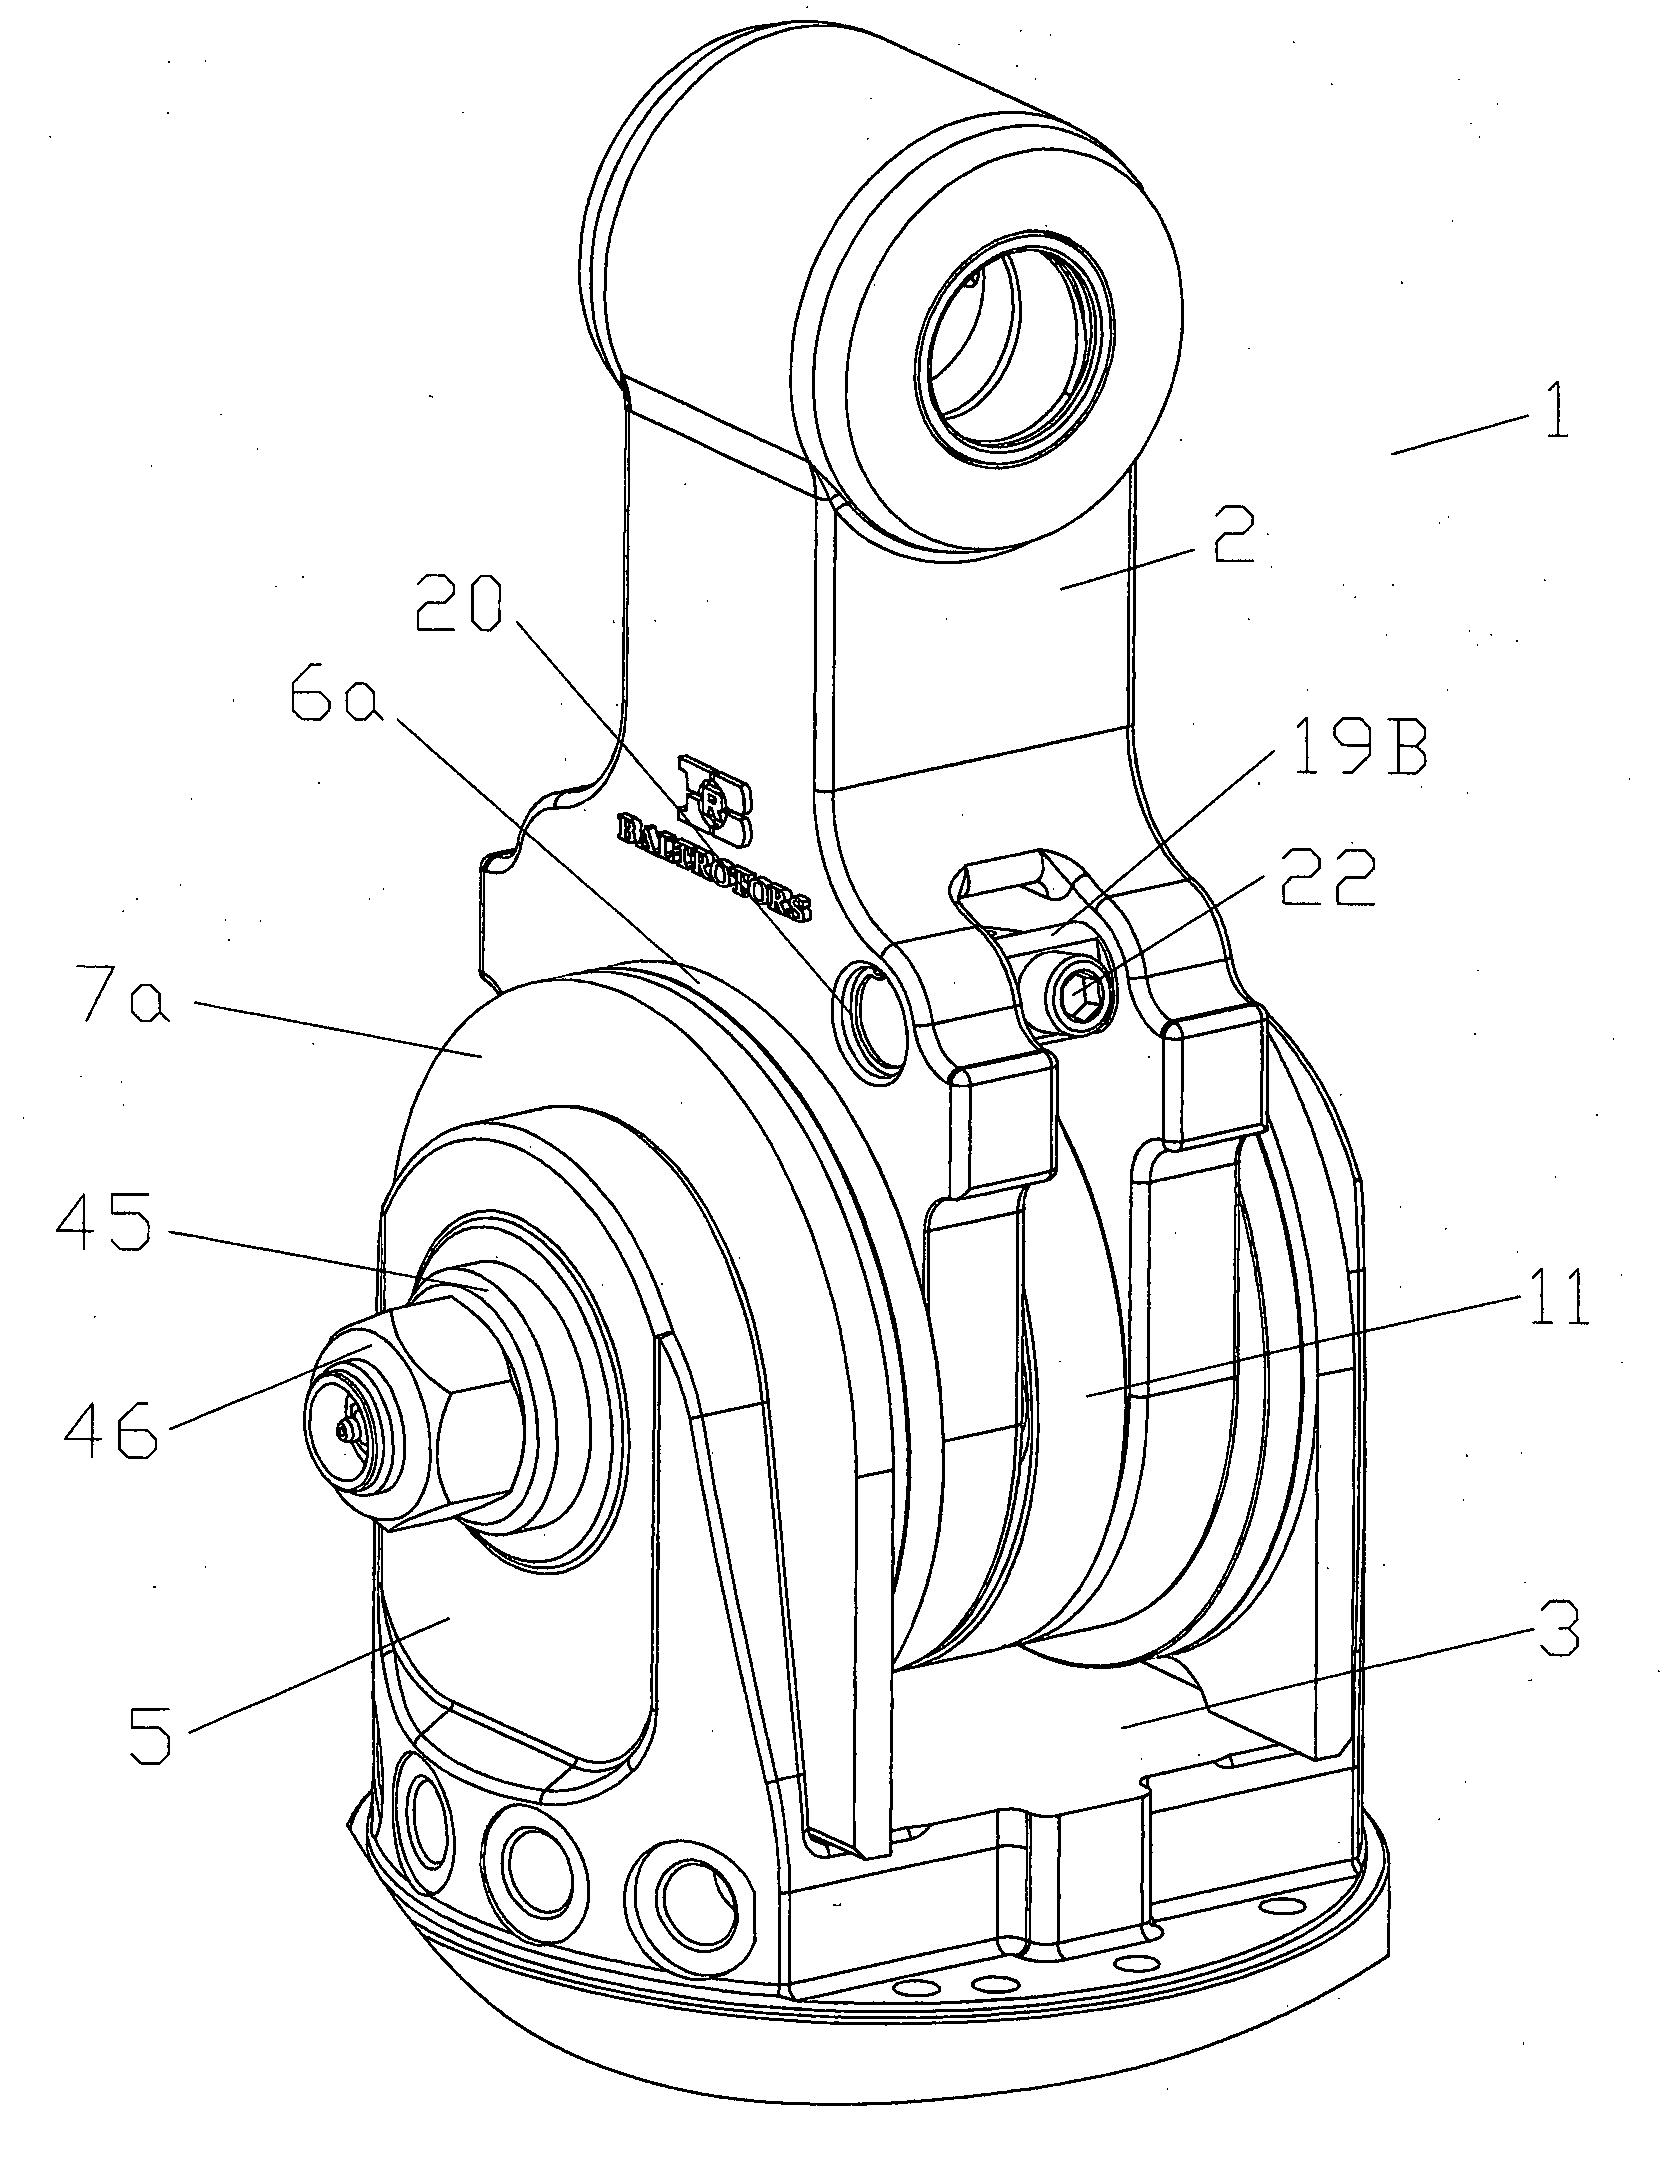 Swing damper with disc brakes and its control mechanism